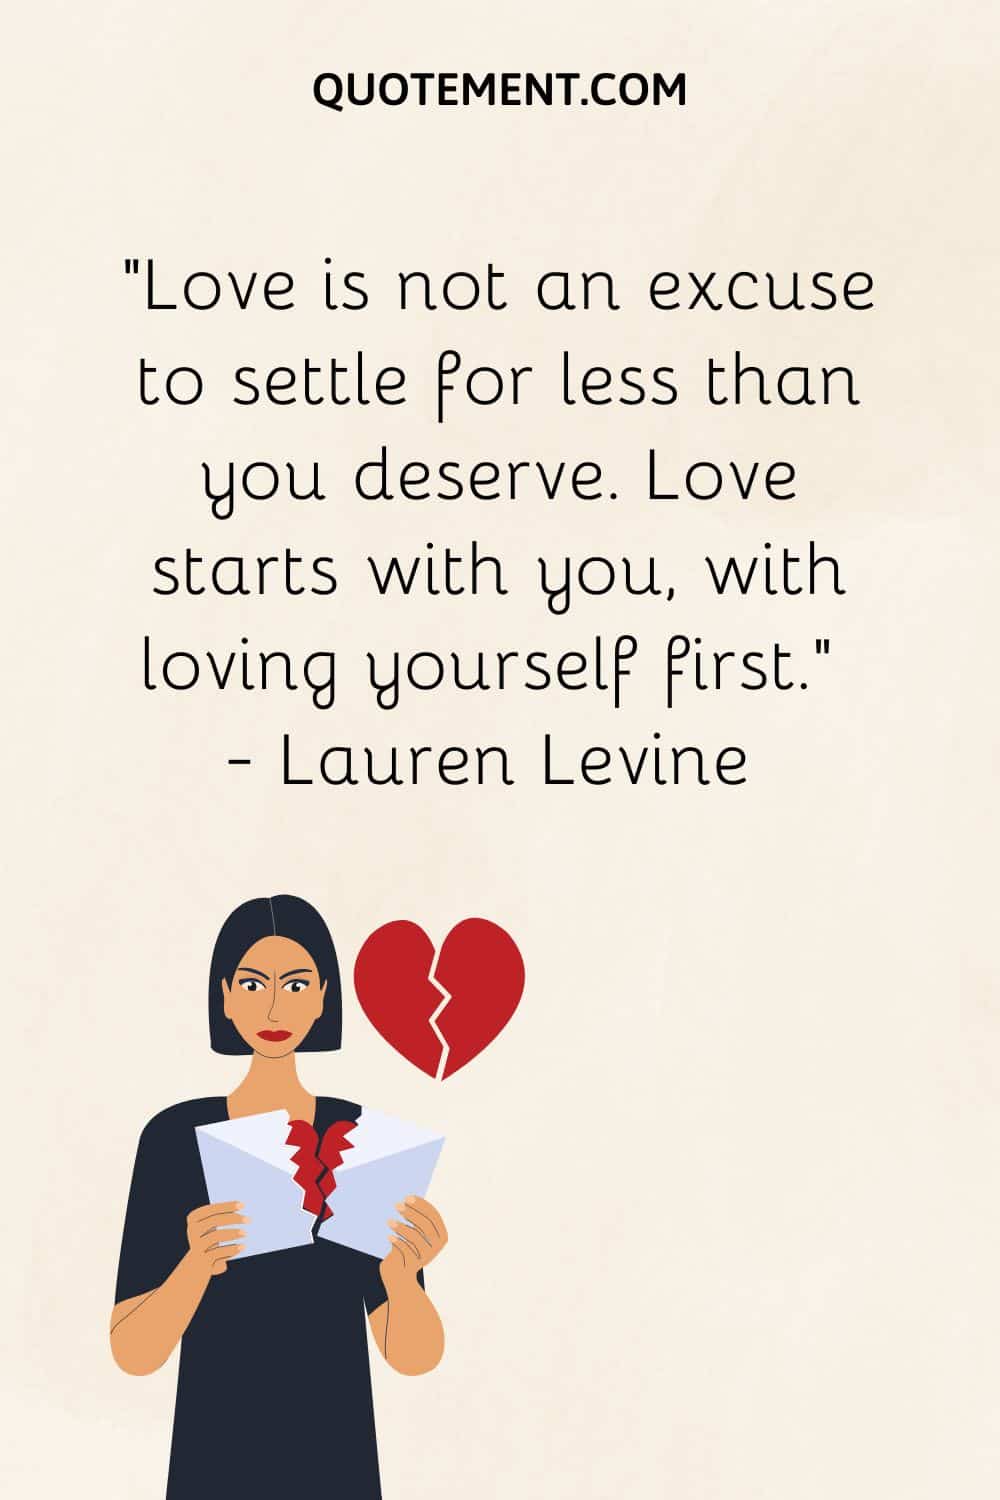 Love is not an excuse to settle for less than you deserve